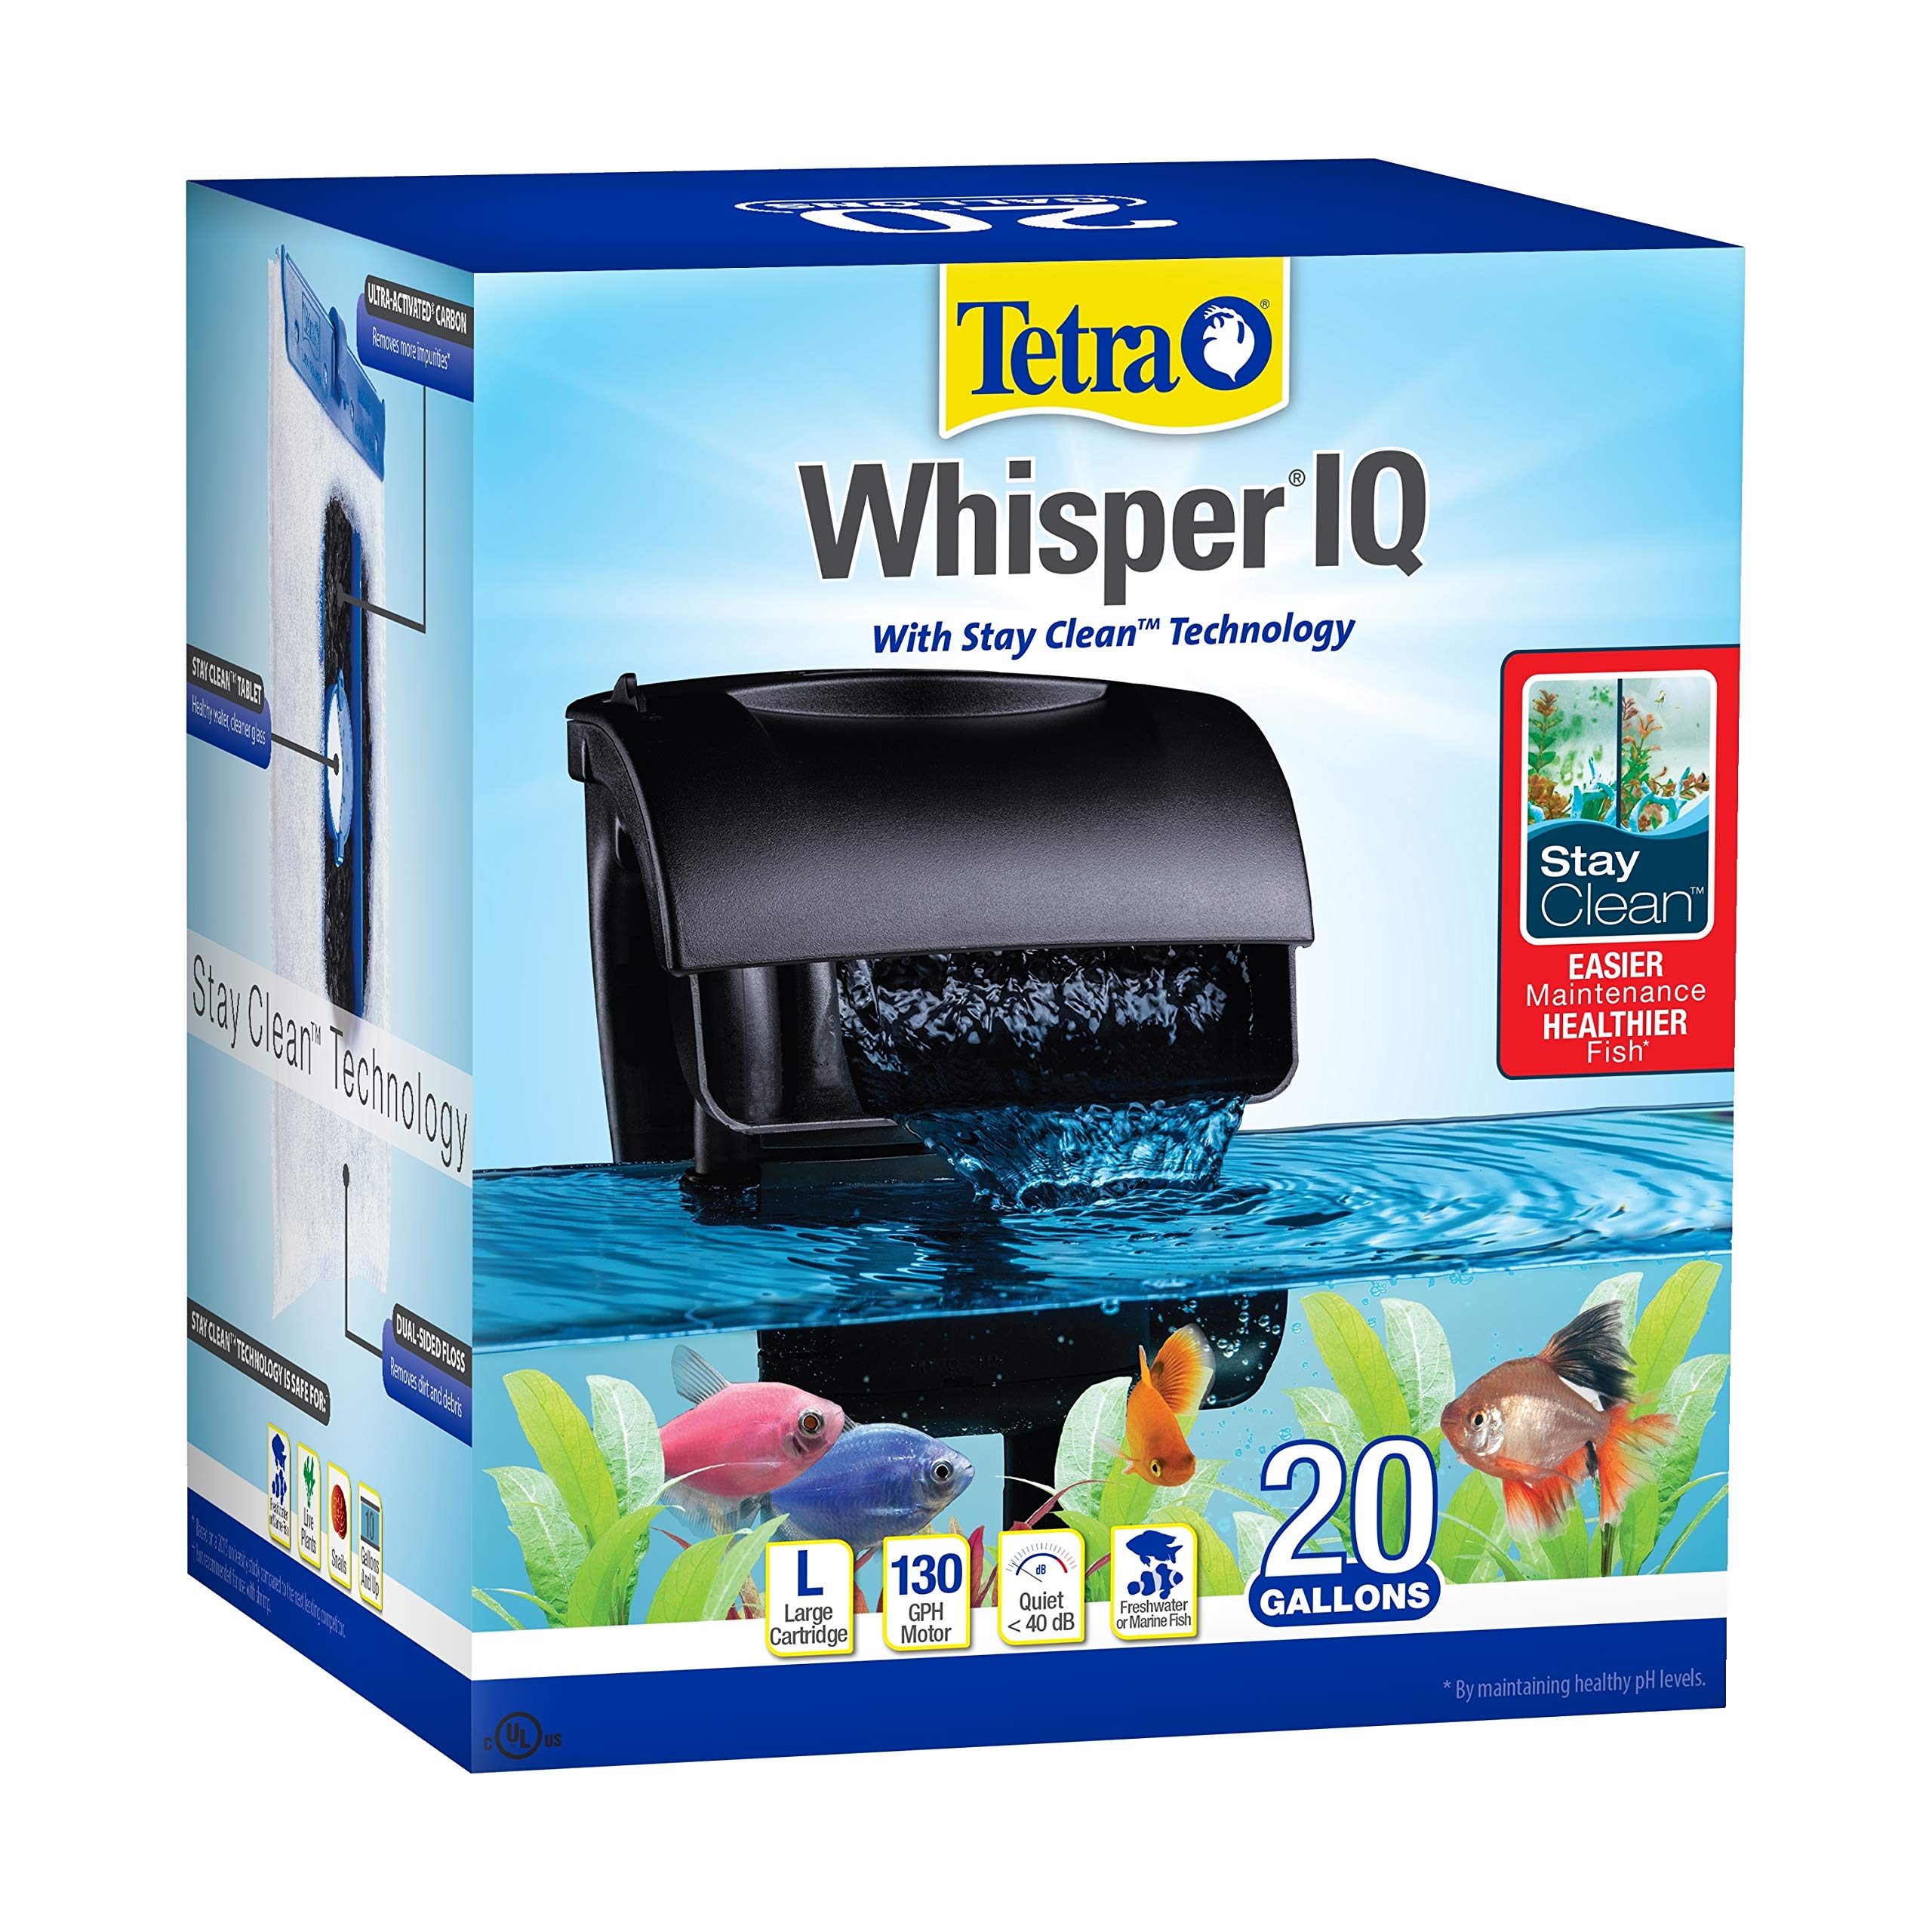 Tetra Whisper IQ Power Filter: 45 Gallons, 215 GPH, Stay Clean Technology